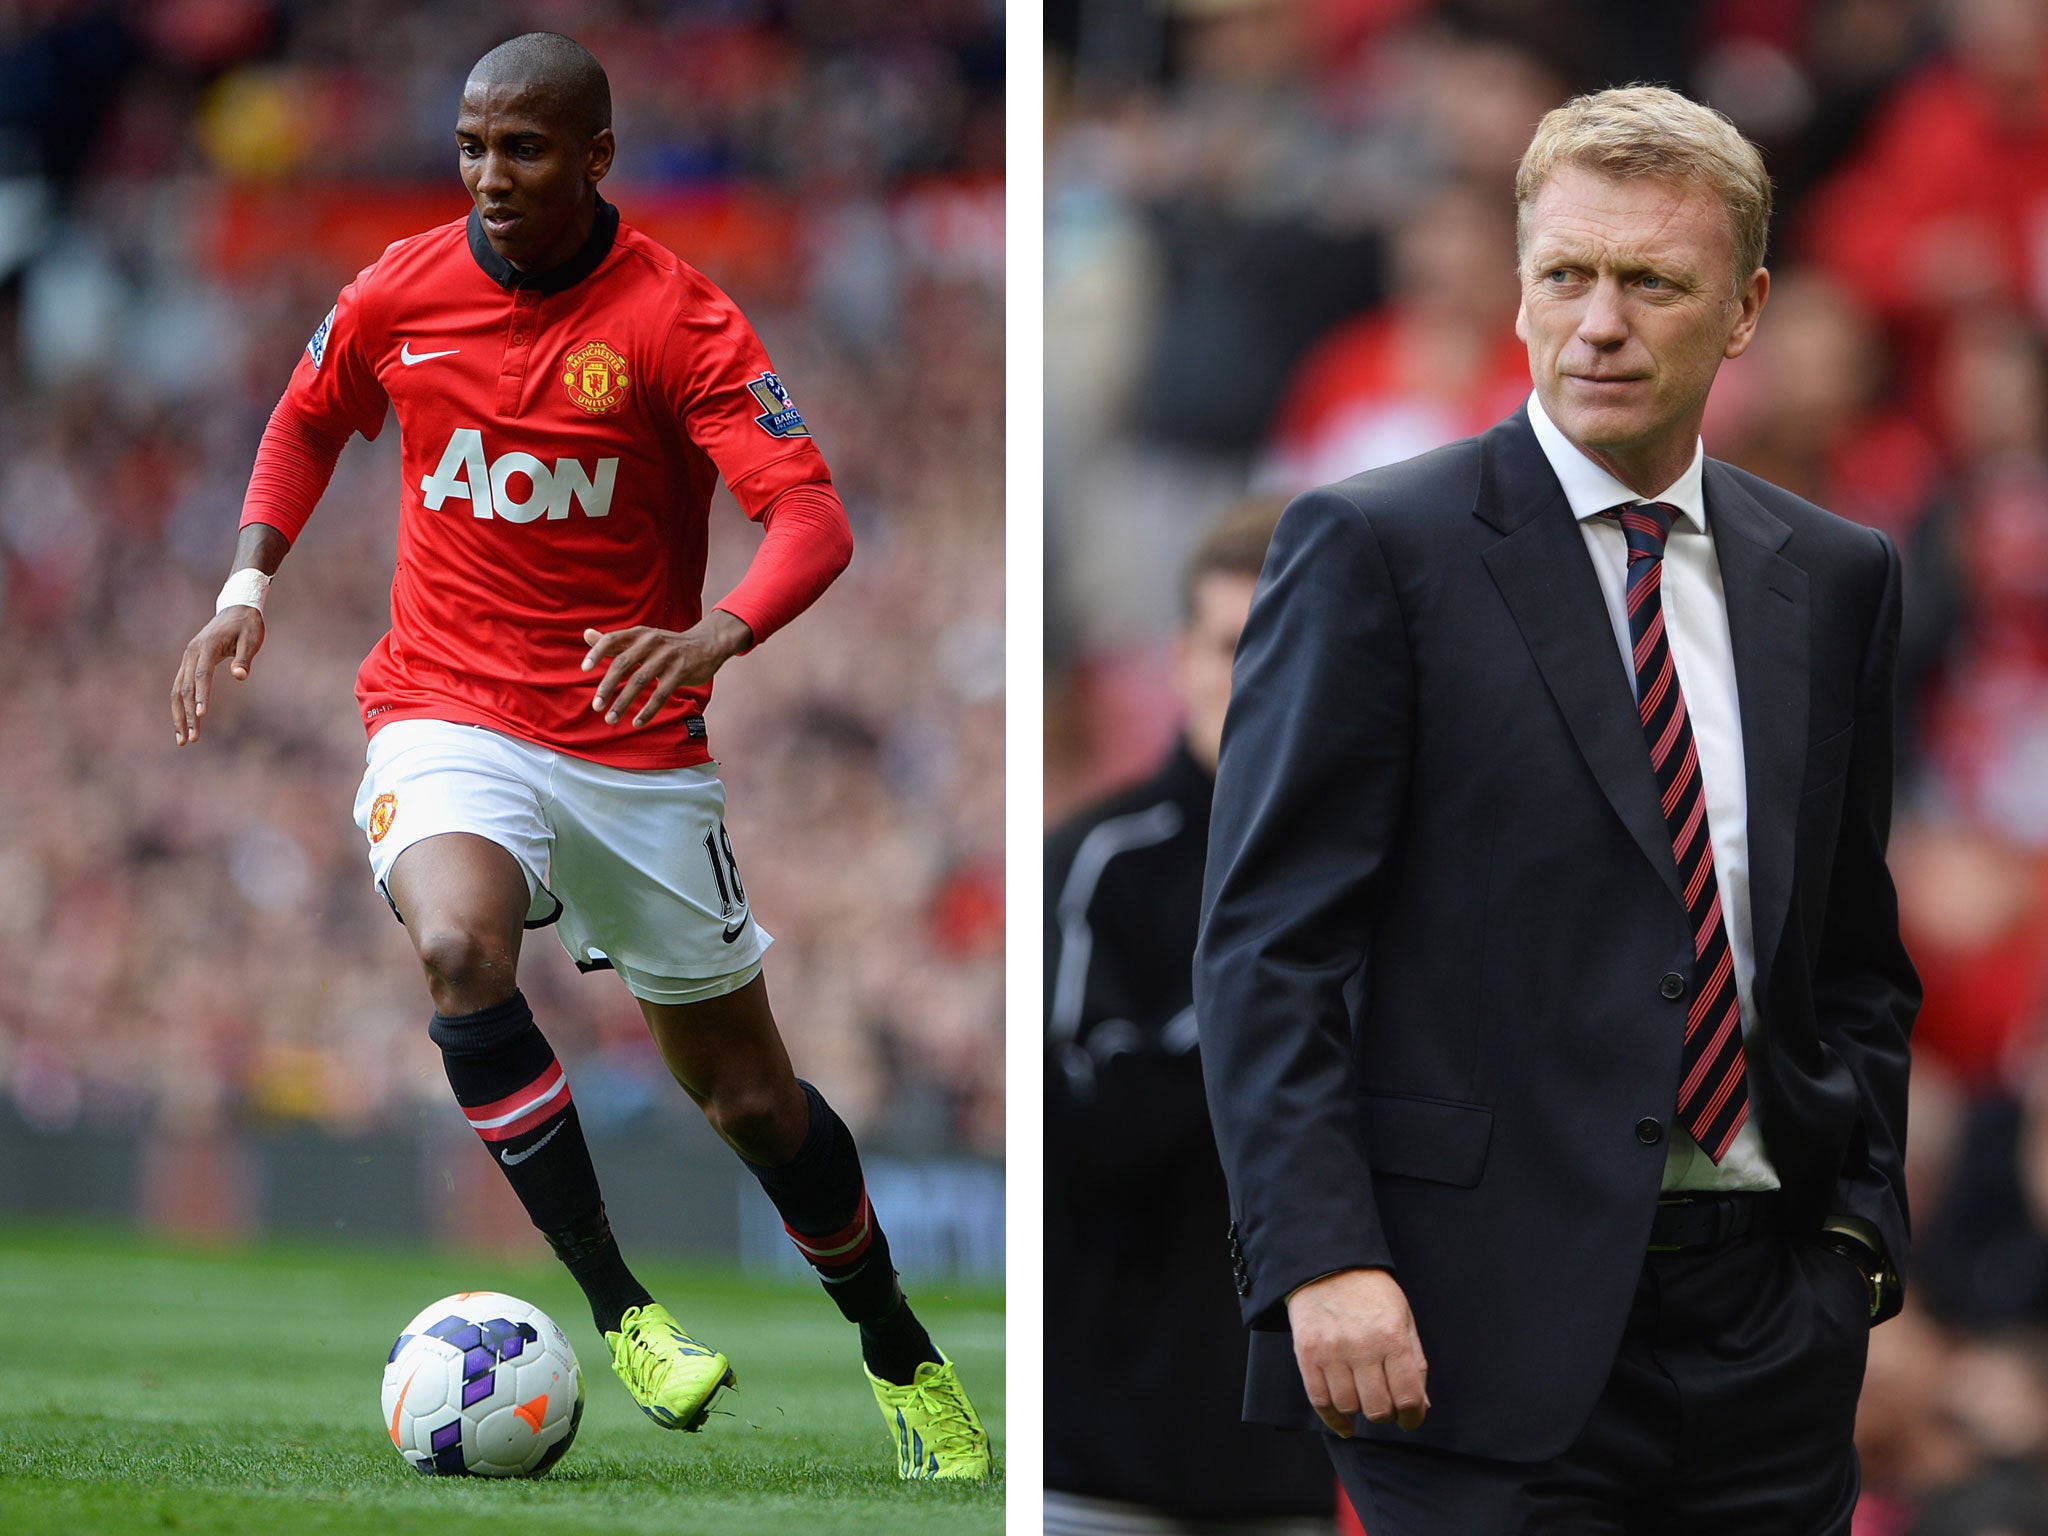 Ashley Young has been warned about diving in future by manager David Moyes